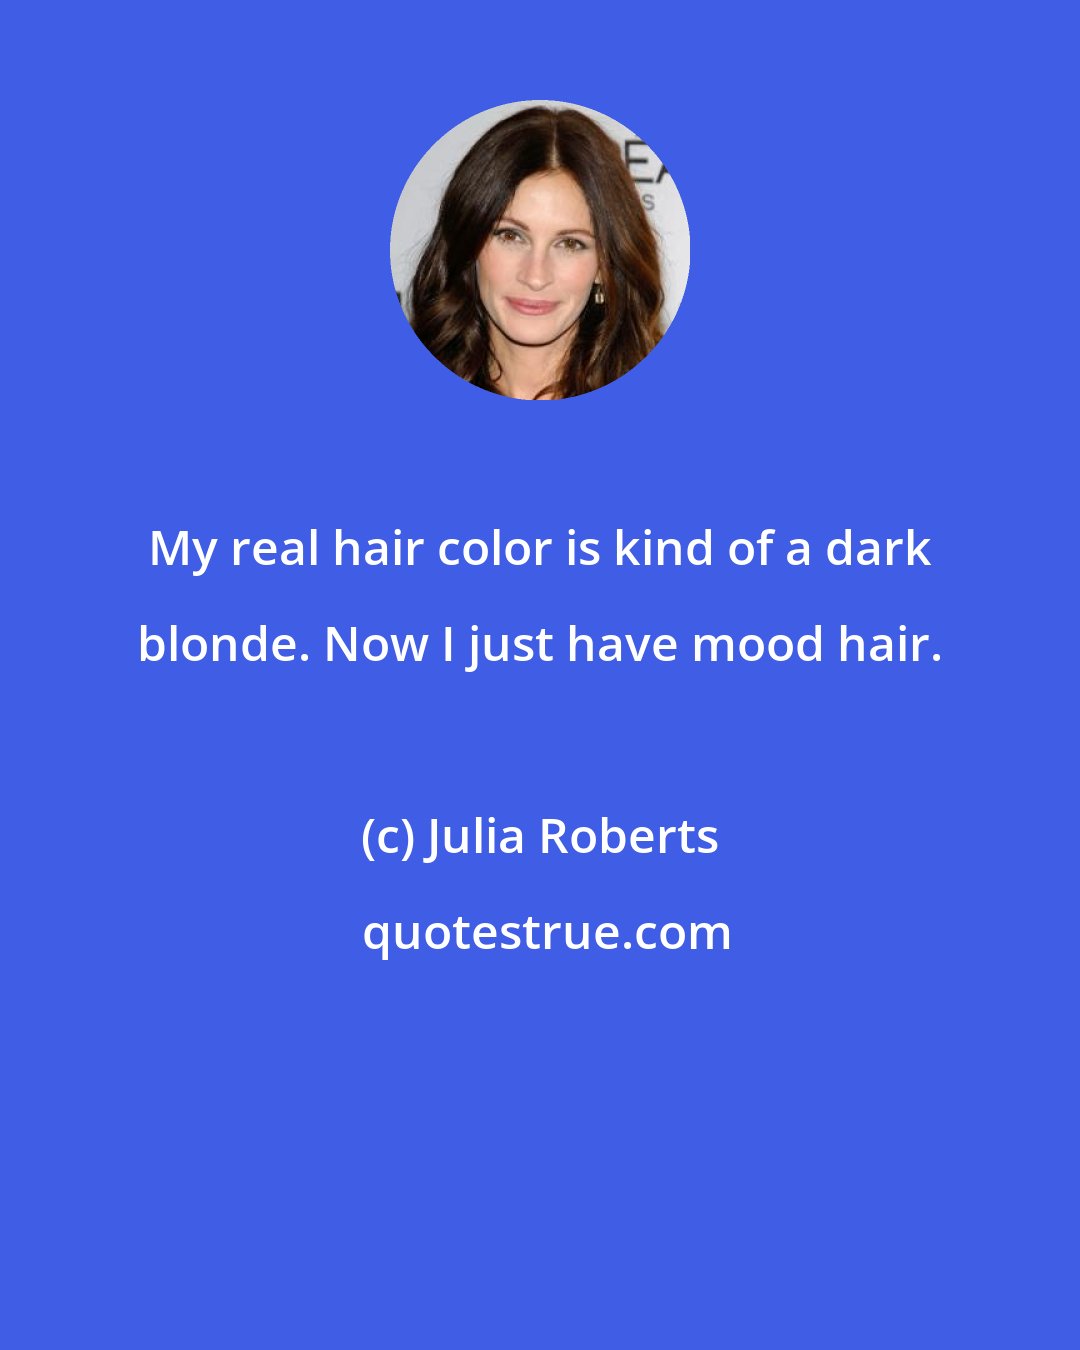 Julia Roberts: My real hair color is kind of a dark blonde. Now I just have mood hair.